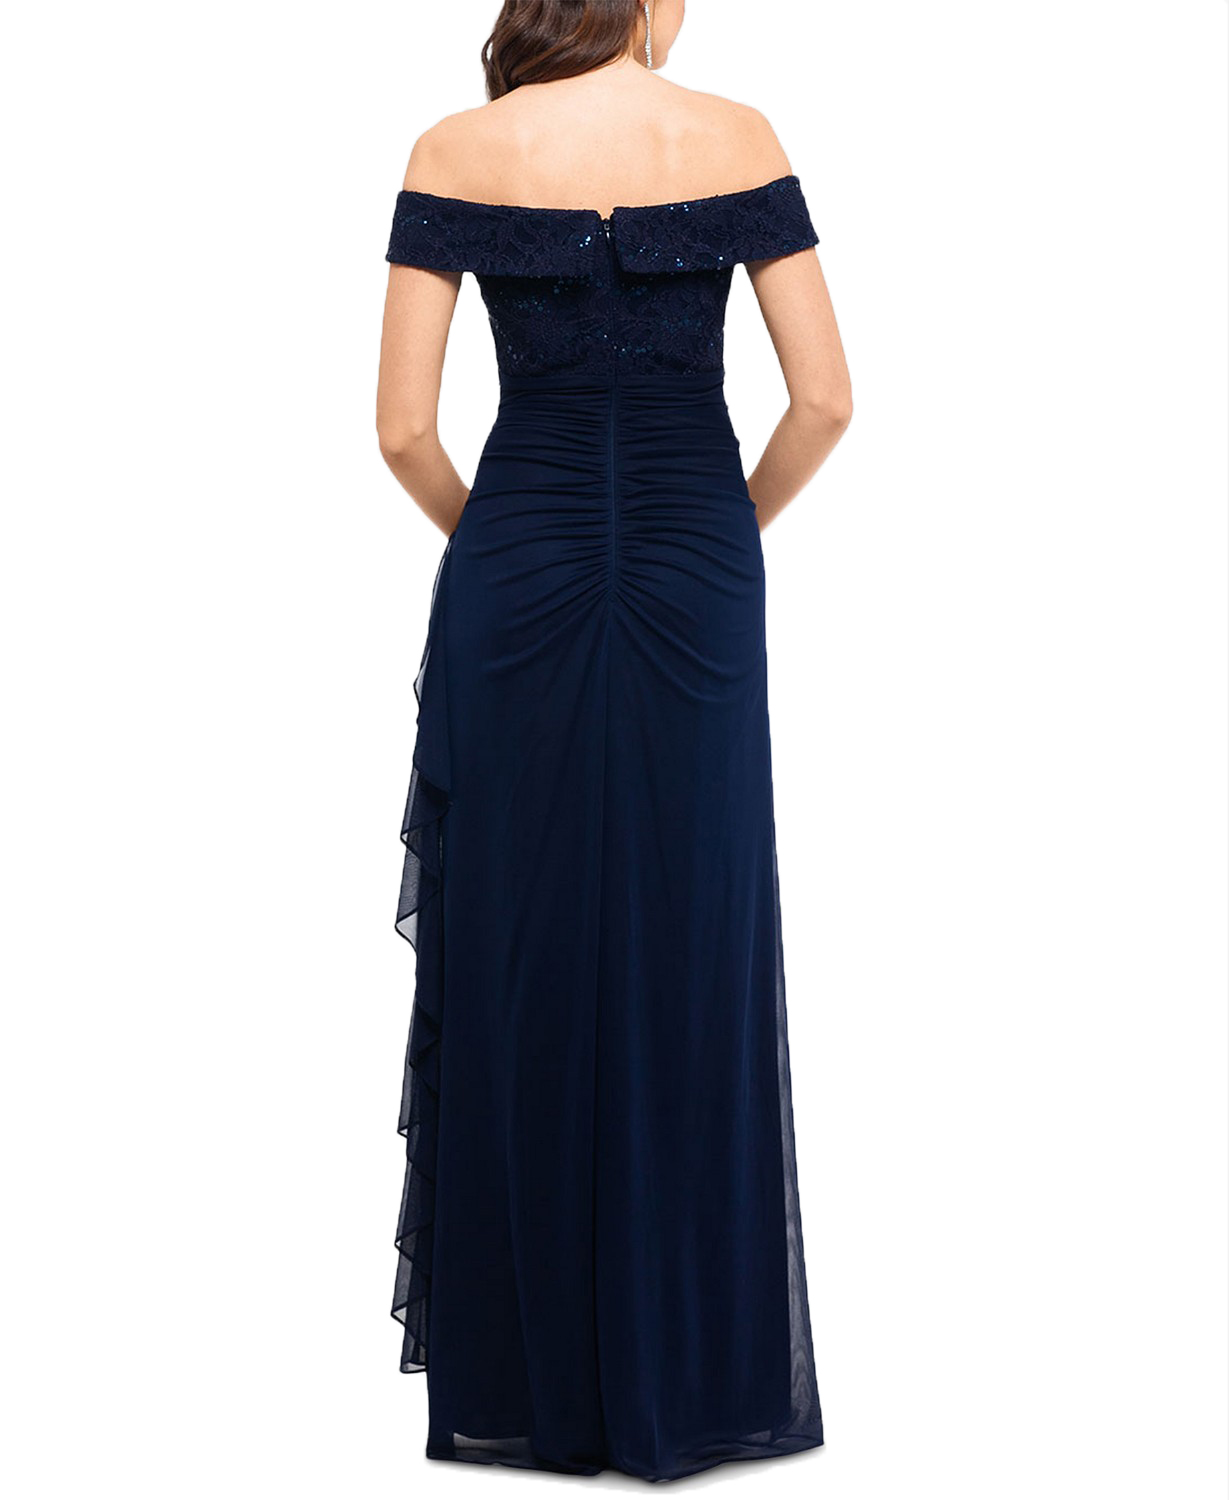 woocommerce-673321-2209615.cloudwaysapps.com-betsy-amp-adam-womens-petite-navy-lace-off-the-shoulder-gown-dress